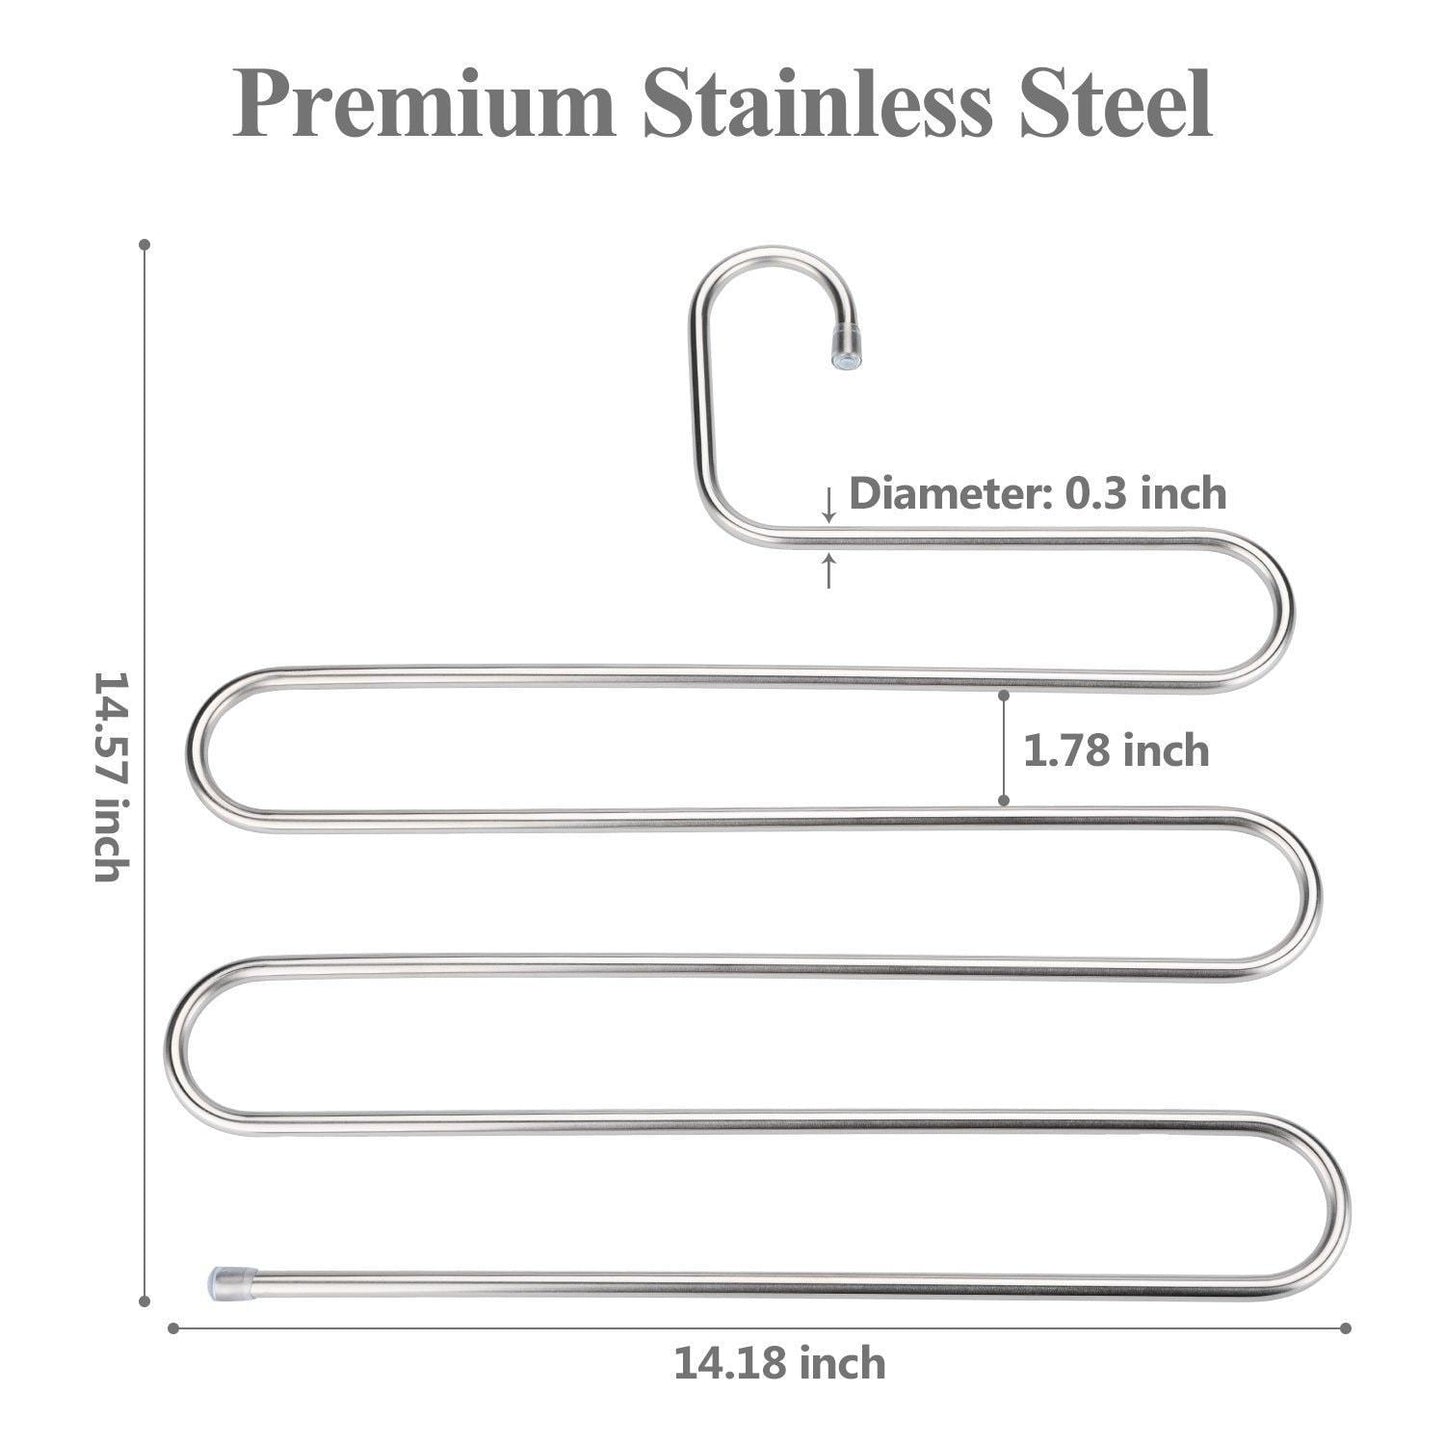 Top rated trusber stainless steel pants hangers s shape metal clothes racks with 5 layers for closet organization space saving for pants jeans trousers scarfs durable and no distortion silver pack of 4